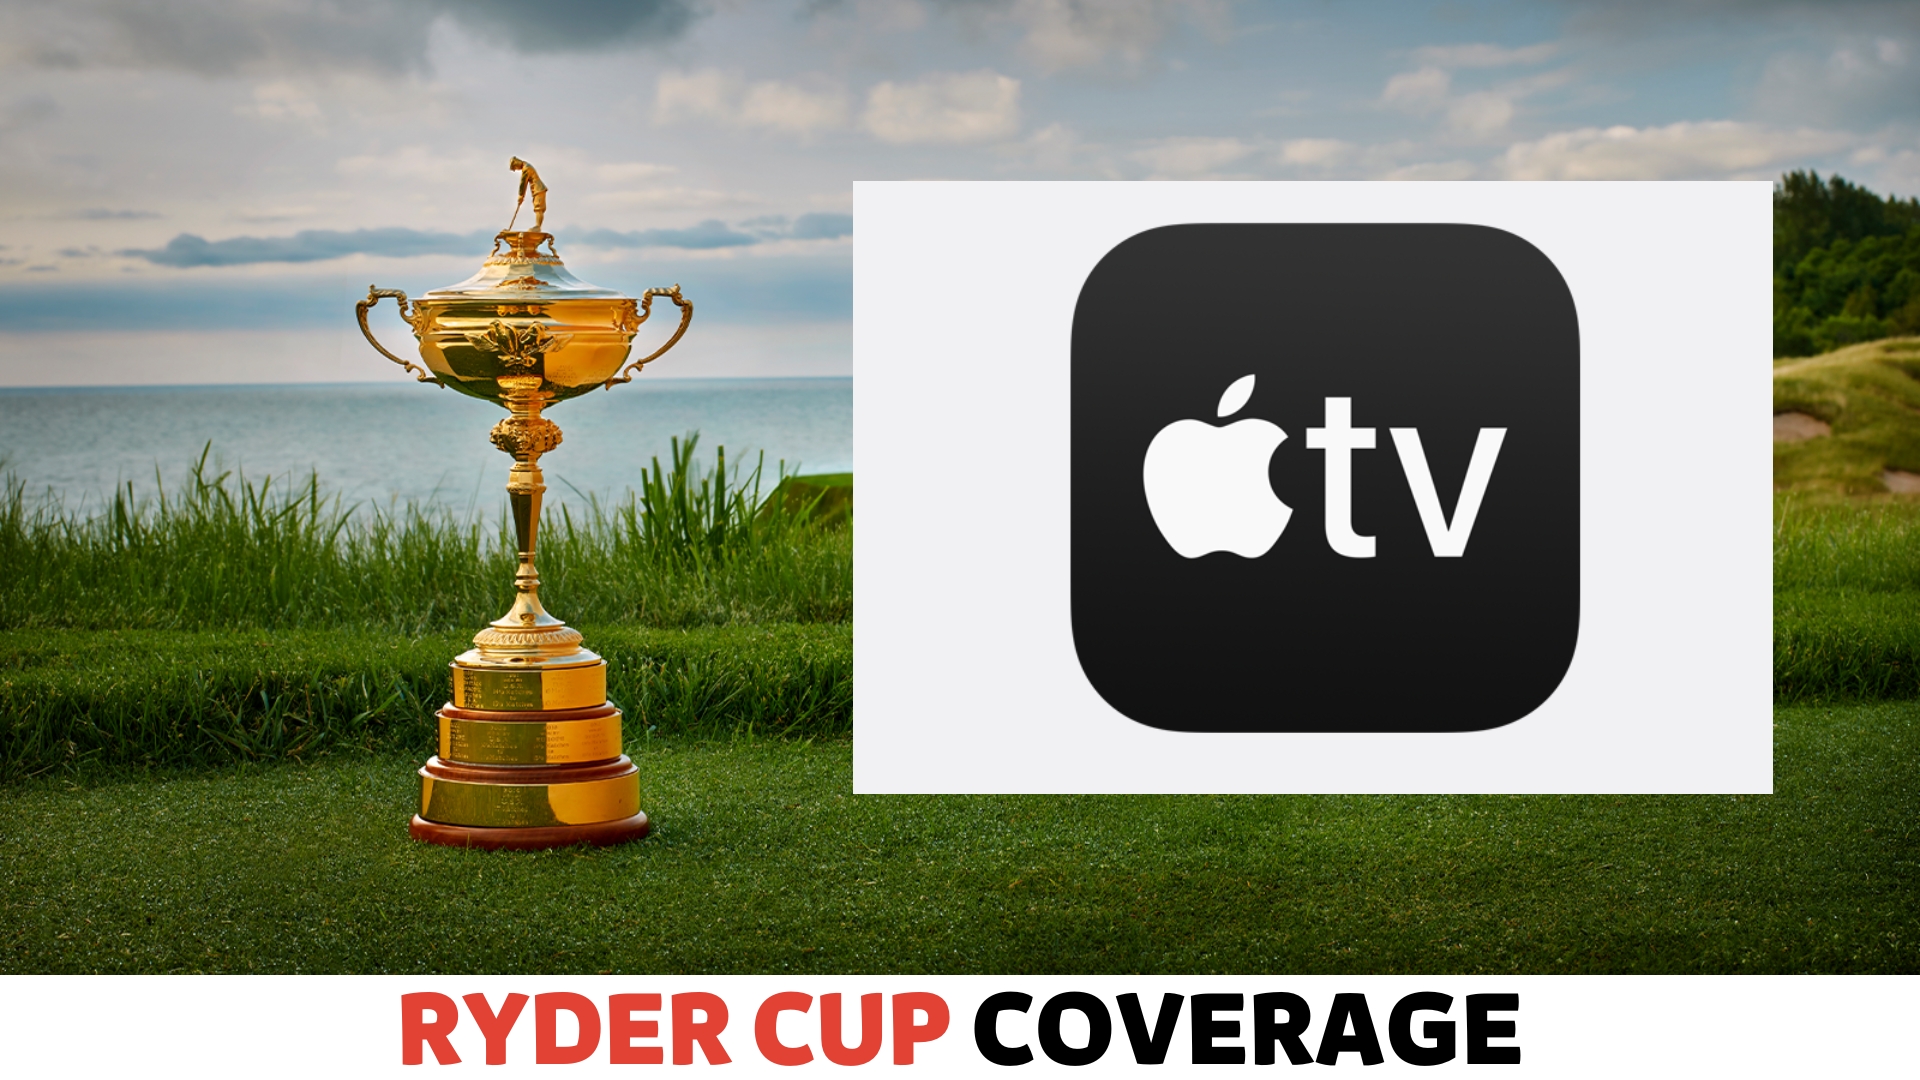 How to Watch Ryder Cup on Apple TV